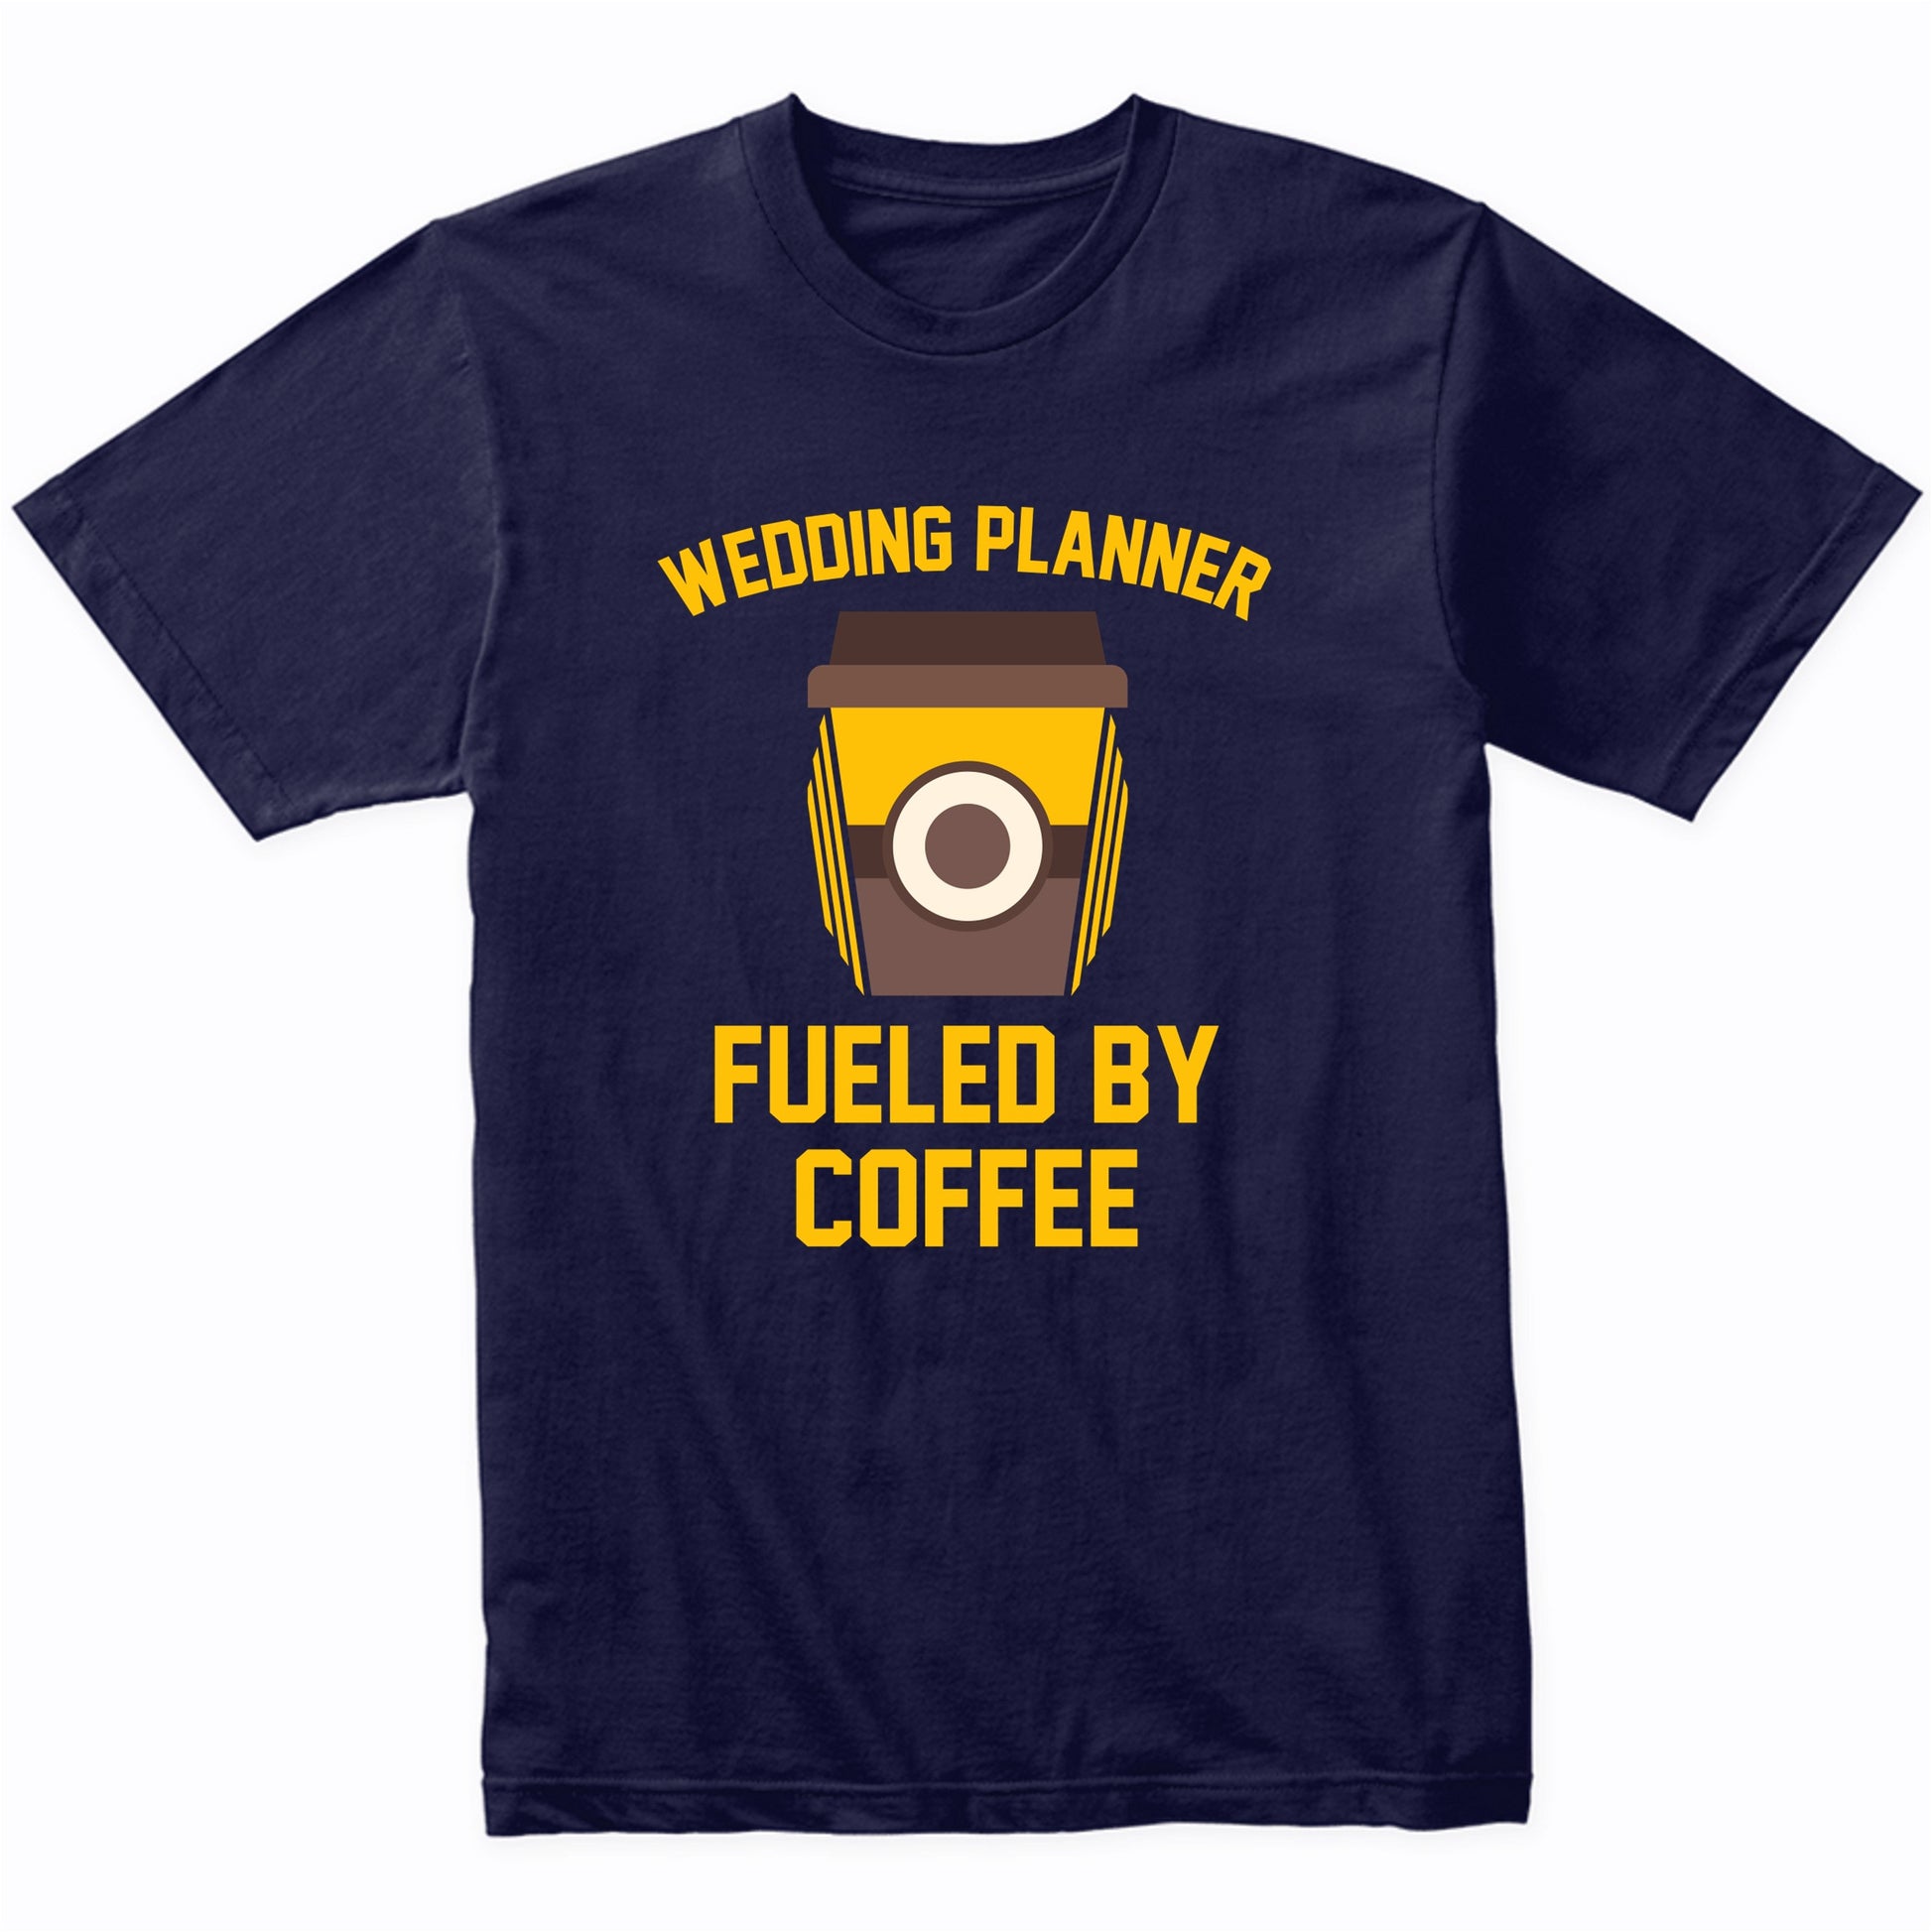 Wedding Planner Fueled By Coffee Funny Shirt